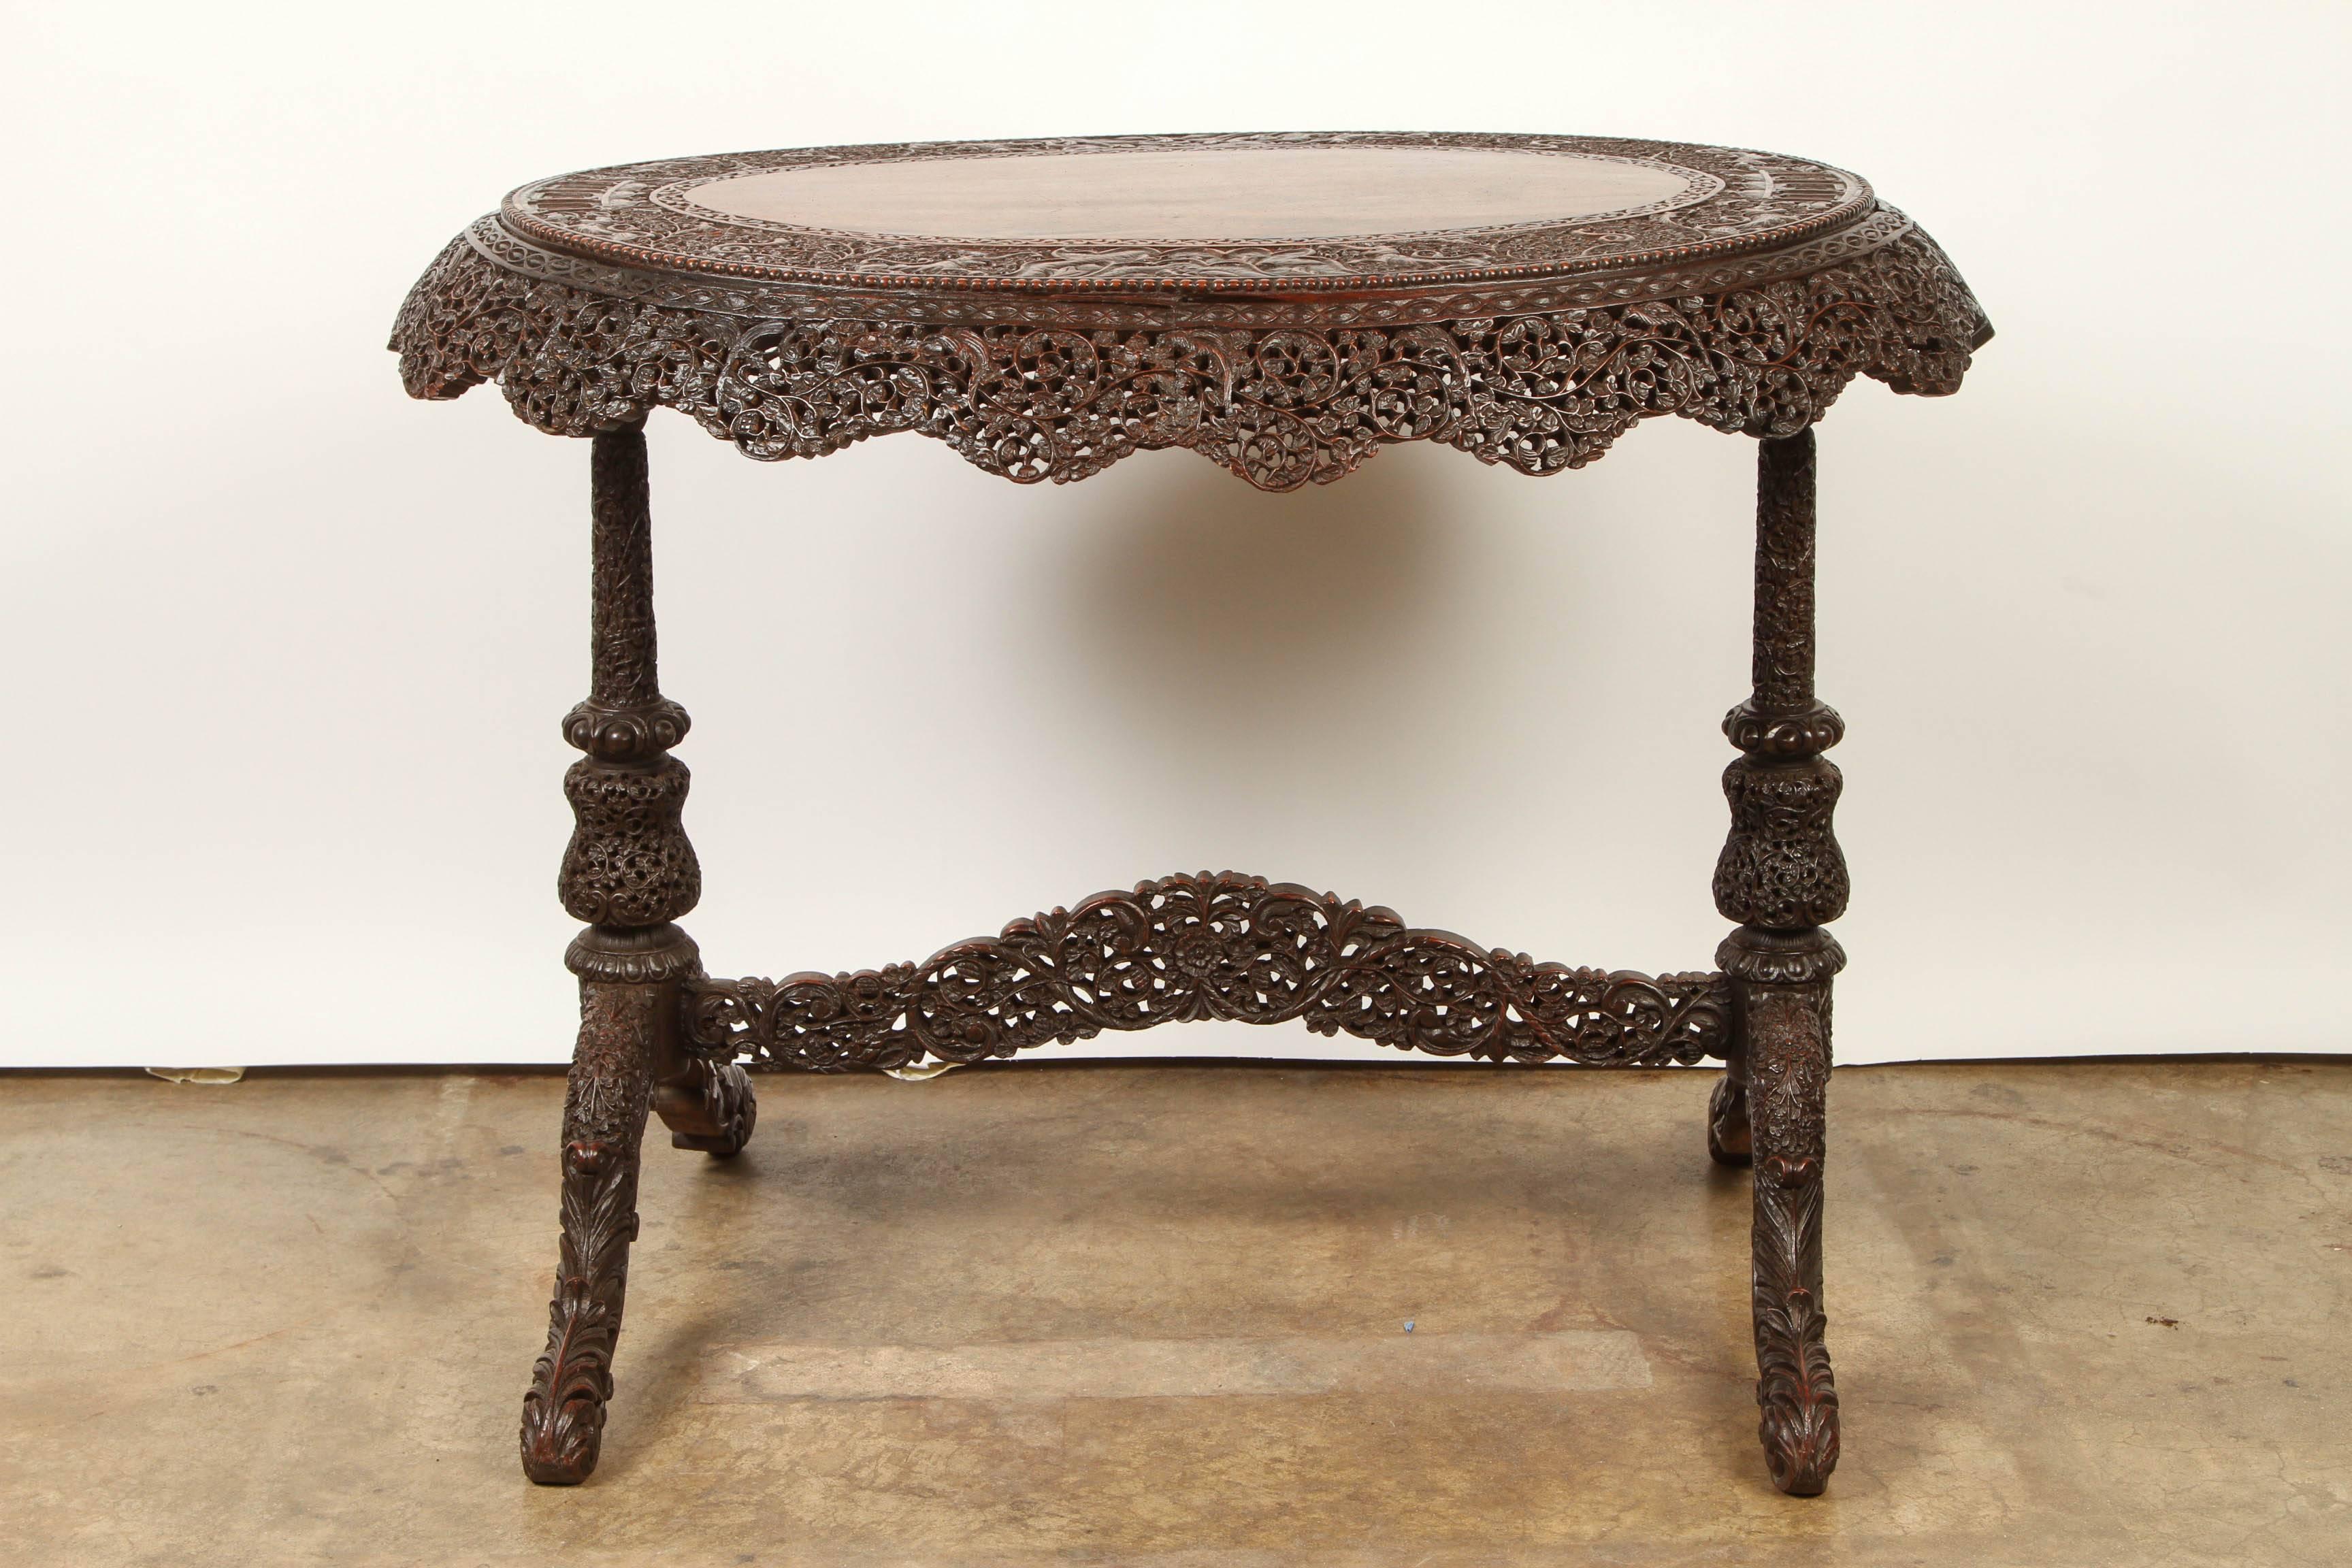 A wonderfully carved and pierced 19th century rosewood Bombay style side table. The center plate is left un-carved to highlight the beautiful grain of the rosewood.